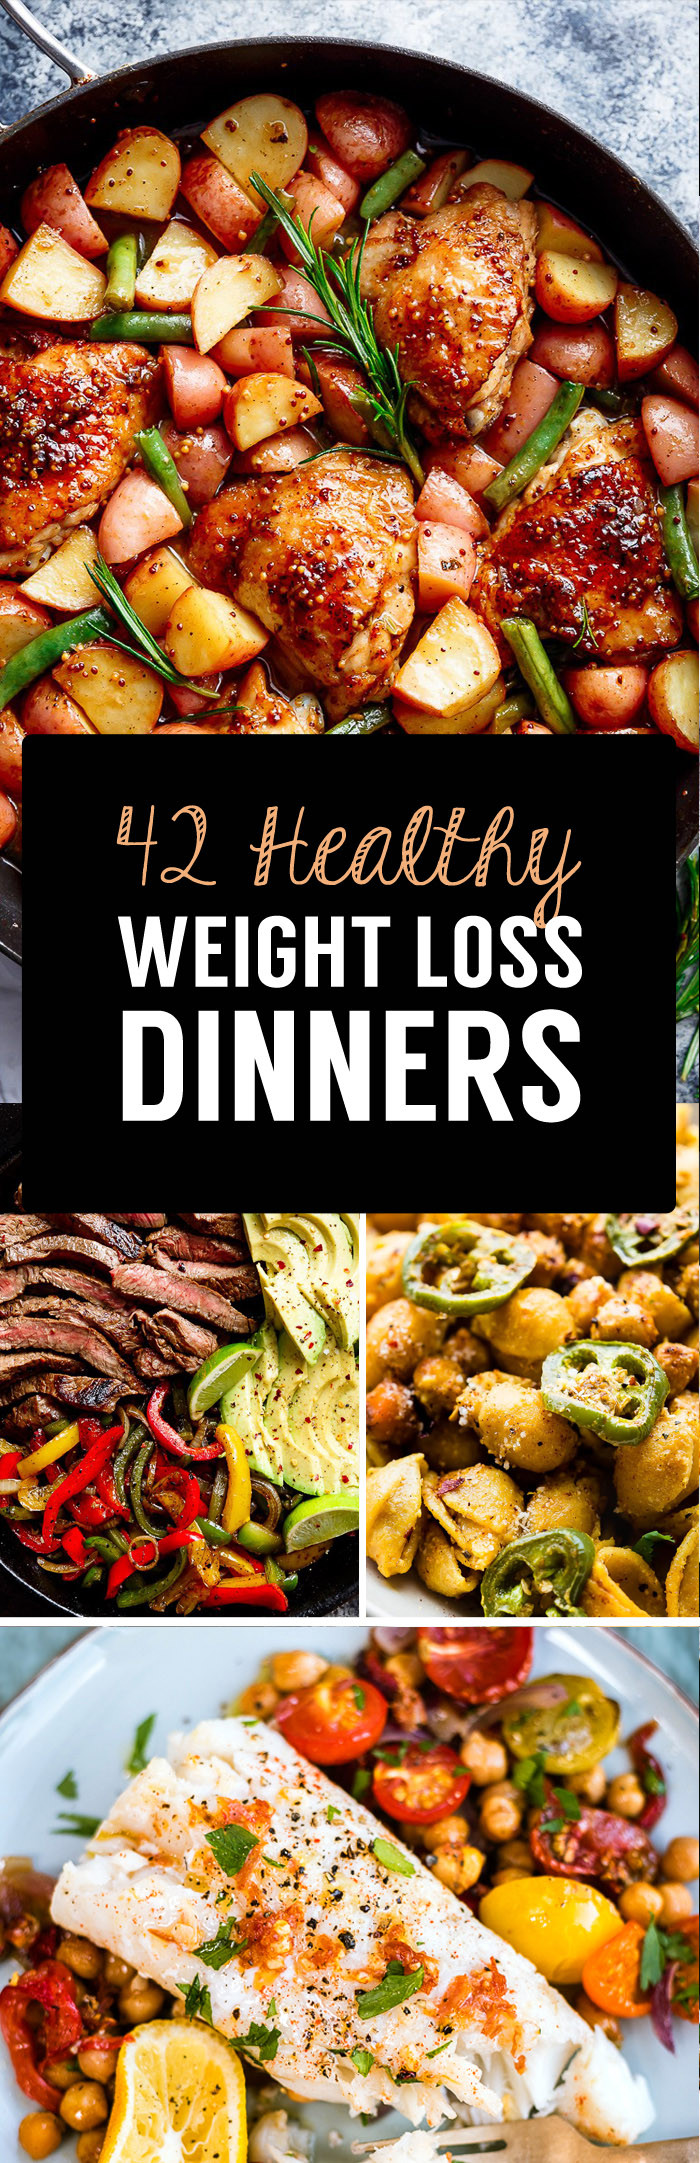 Healthy Recipes For Weight Loss
 117 Weight Loss Meal Recipes For Every Time The Day